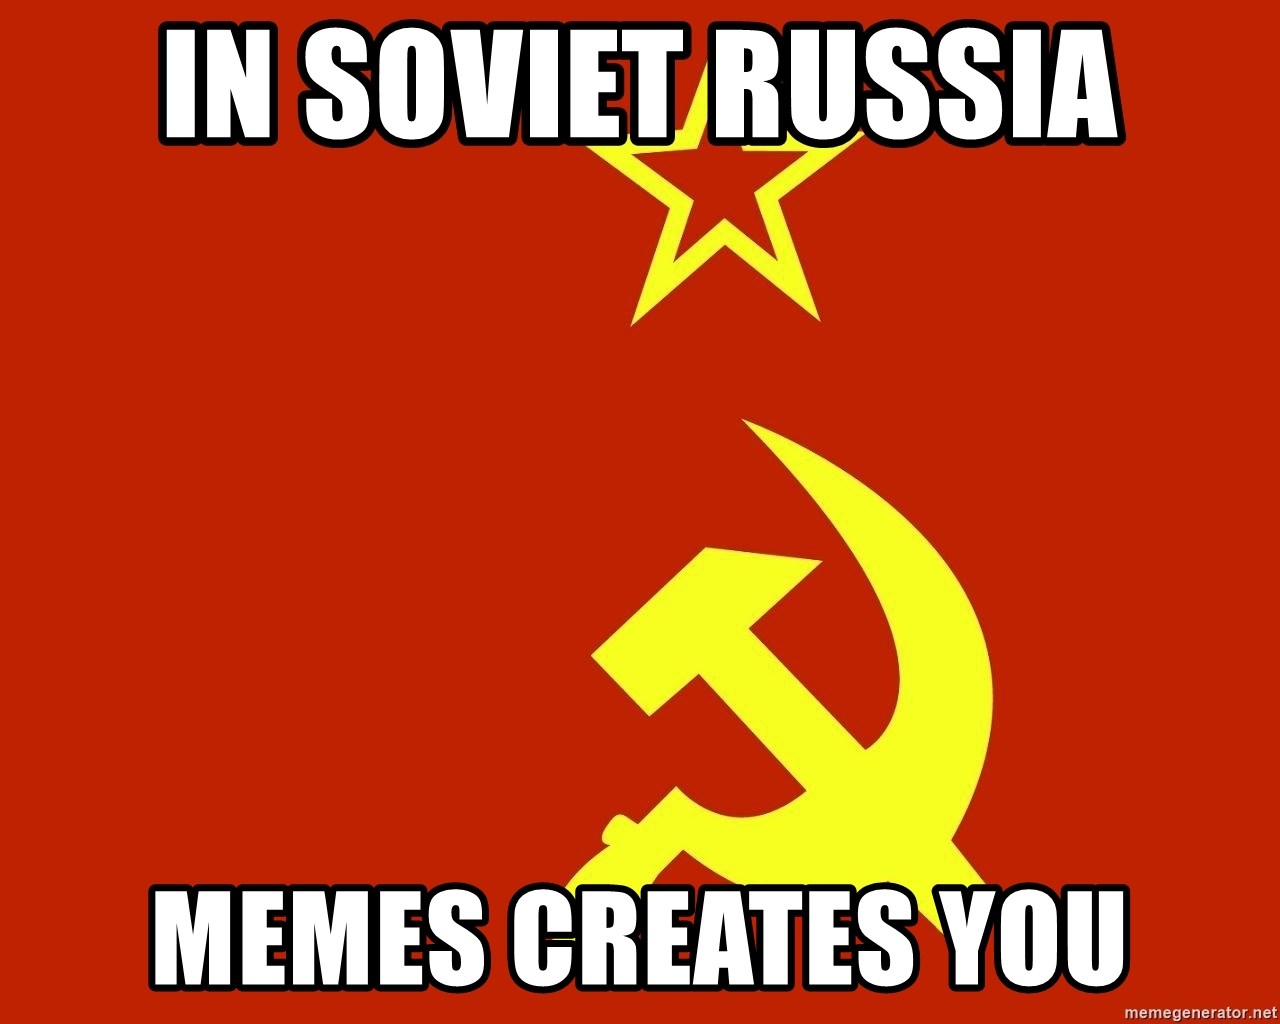 In Soviet Russia - in soviet russia memes creates you